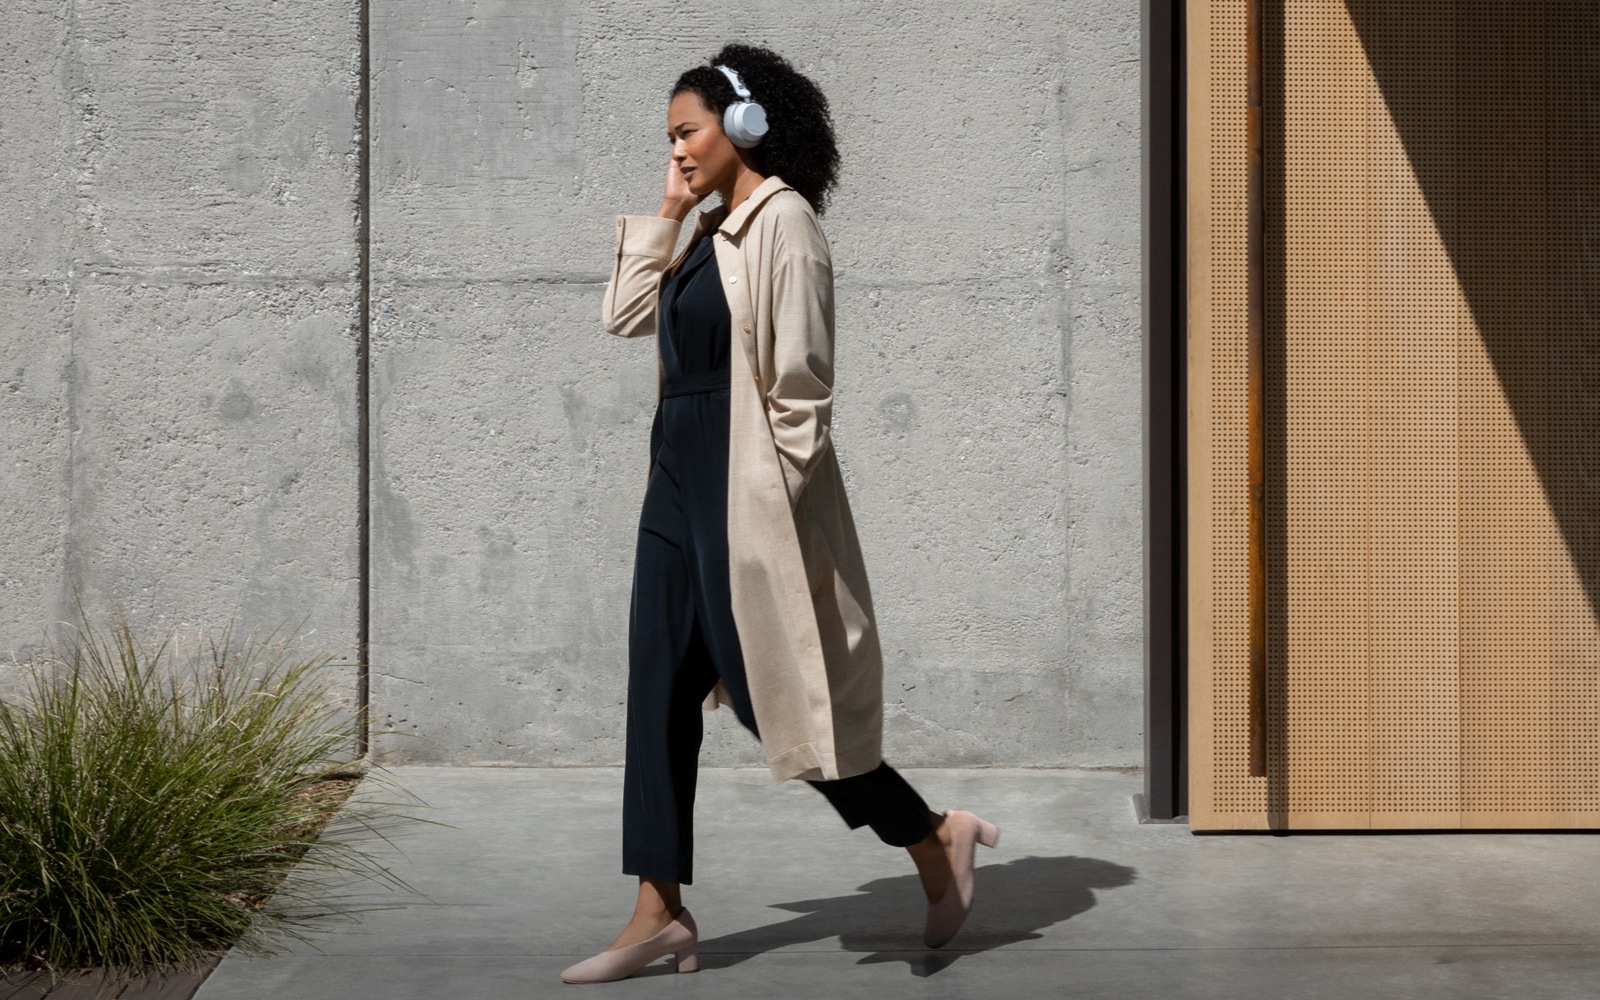 A woman walking with Surface Headphones on her head